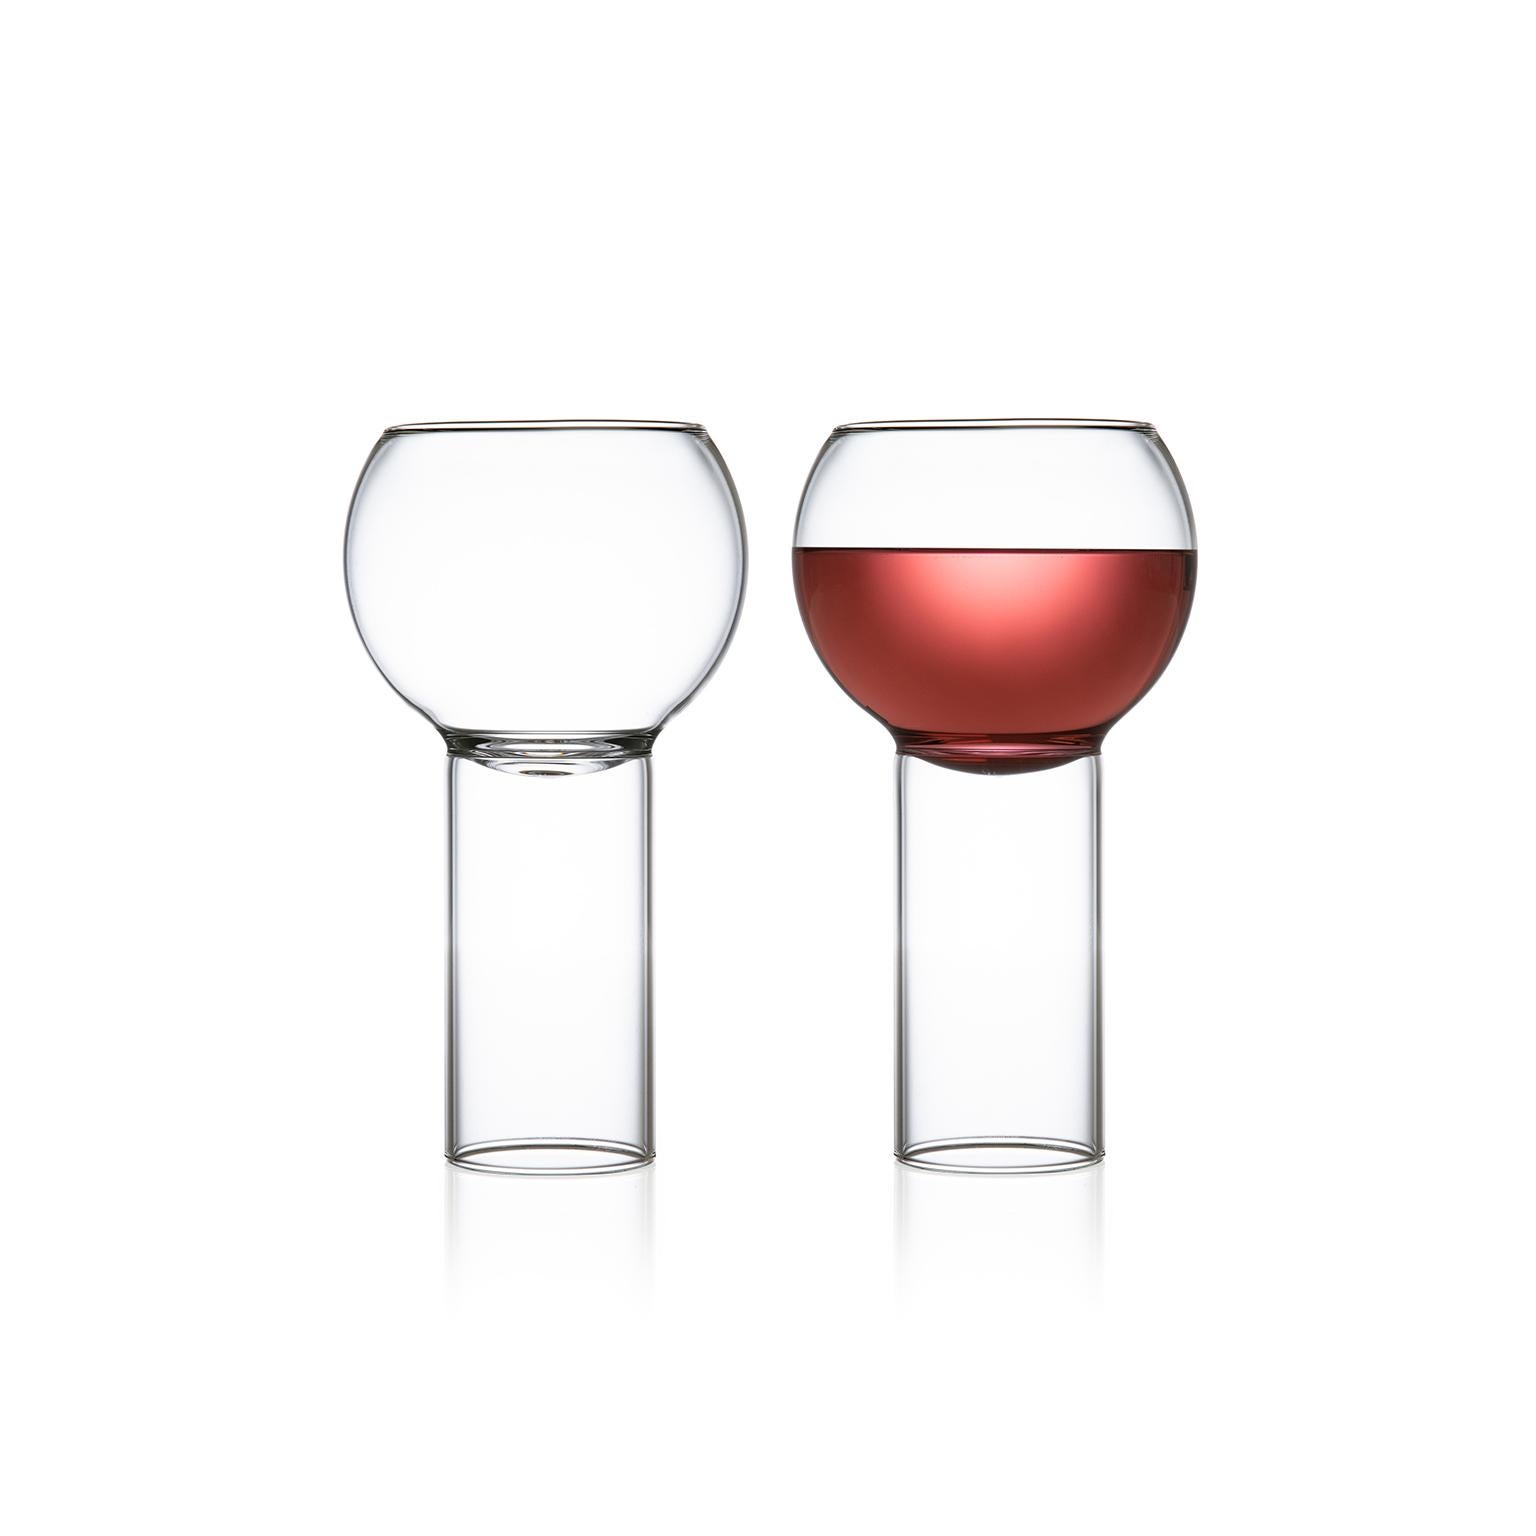 Tulip tall small, set of two

This item is also available in the US.

The Tulip collection was inspired by the small bistro wine glasses found in European bars and cafes. The bowl of the glass sits down into the cylindrical stem, highlighting